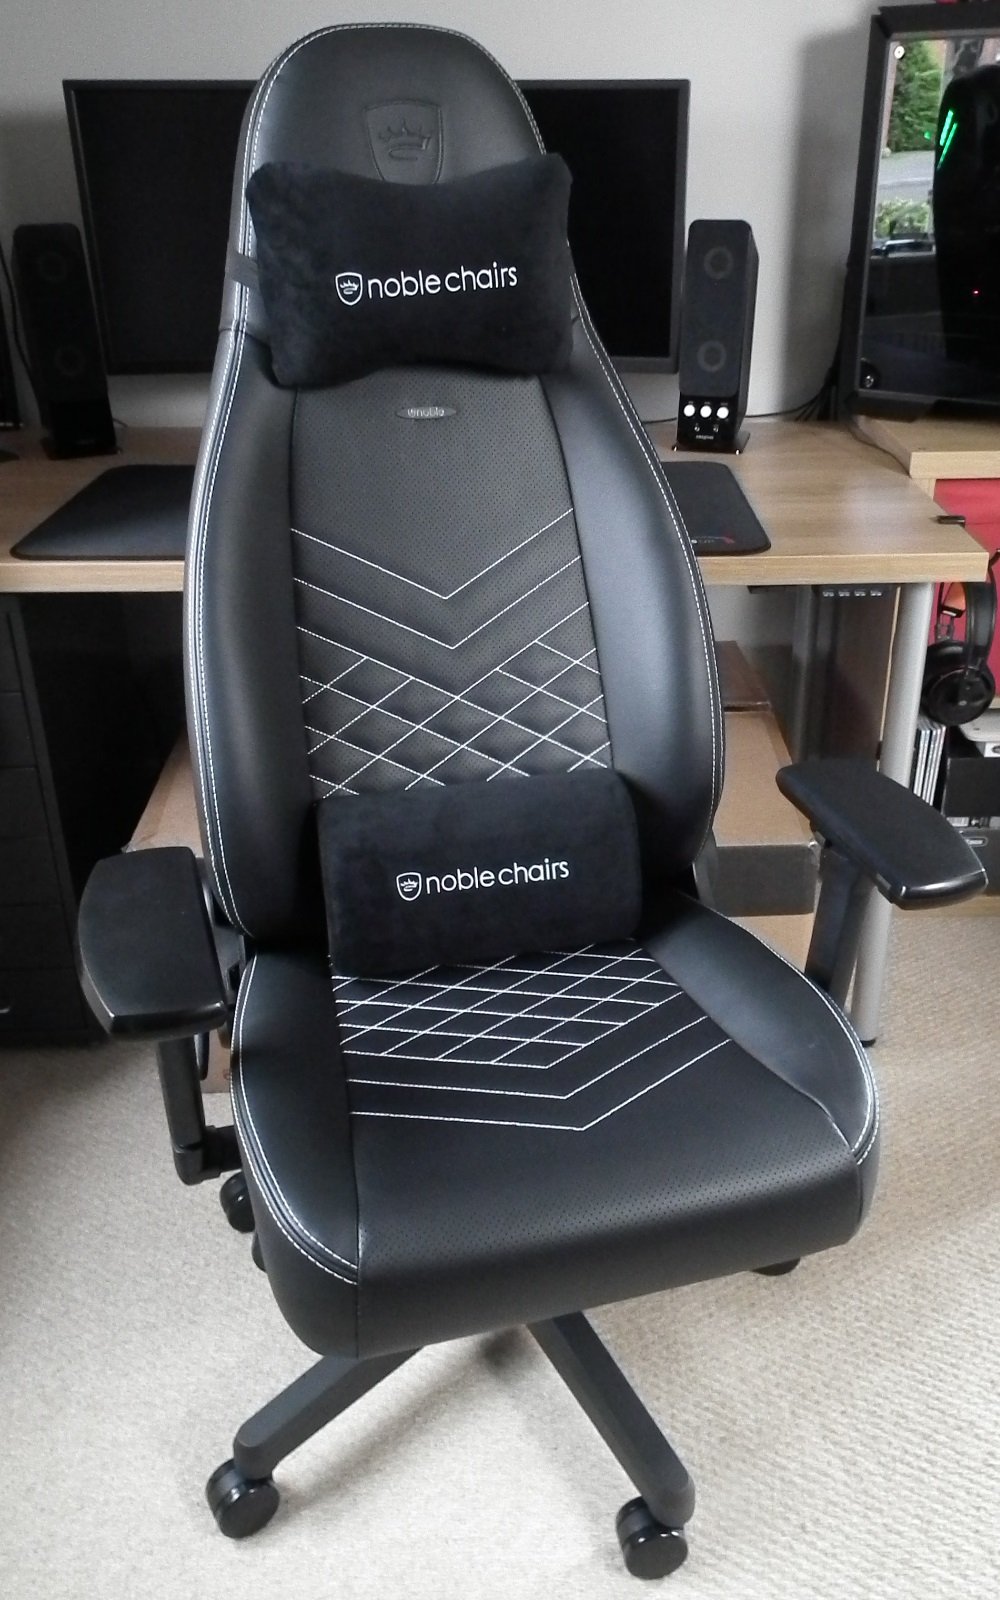 noblechairs ICON chair